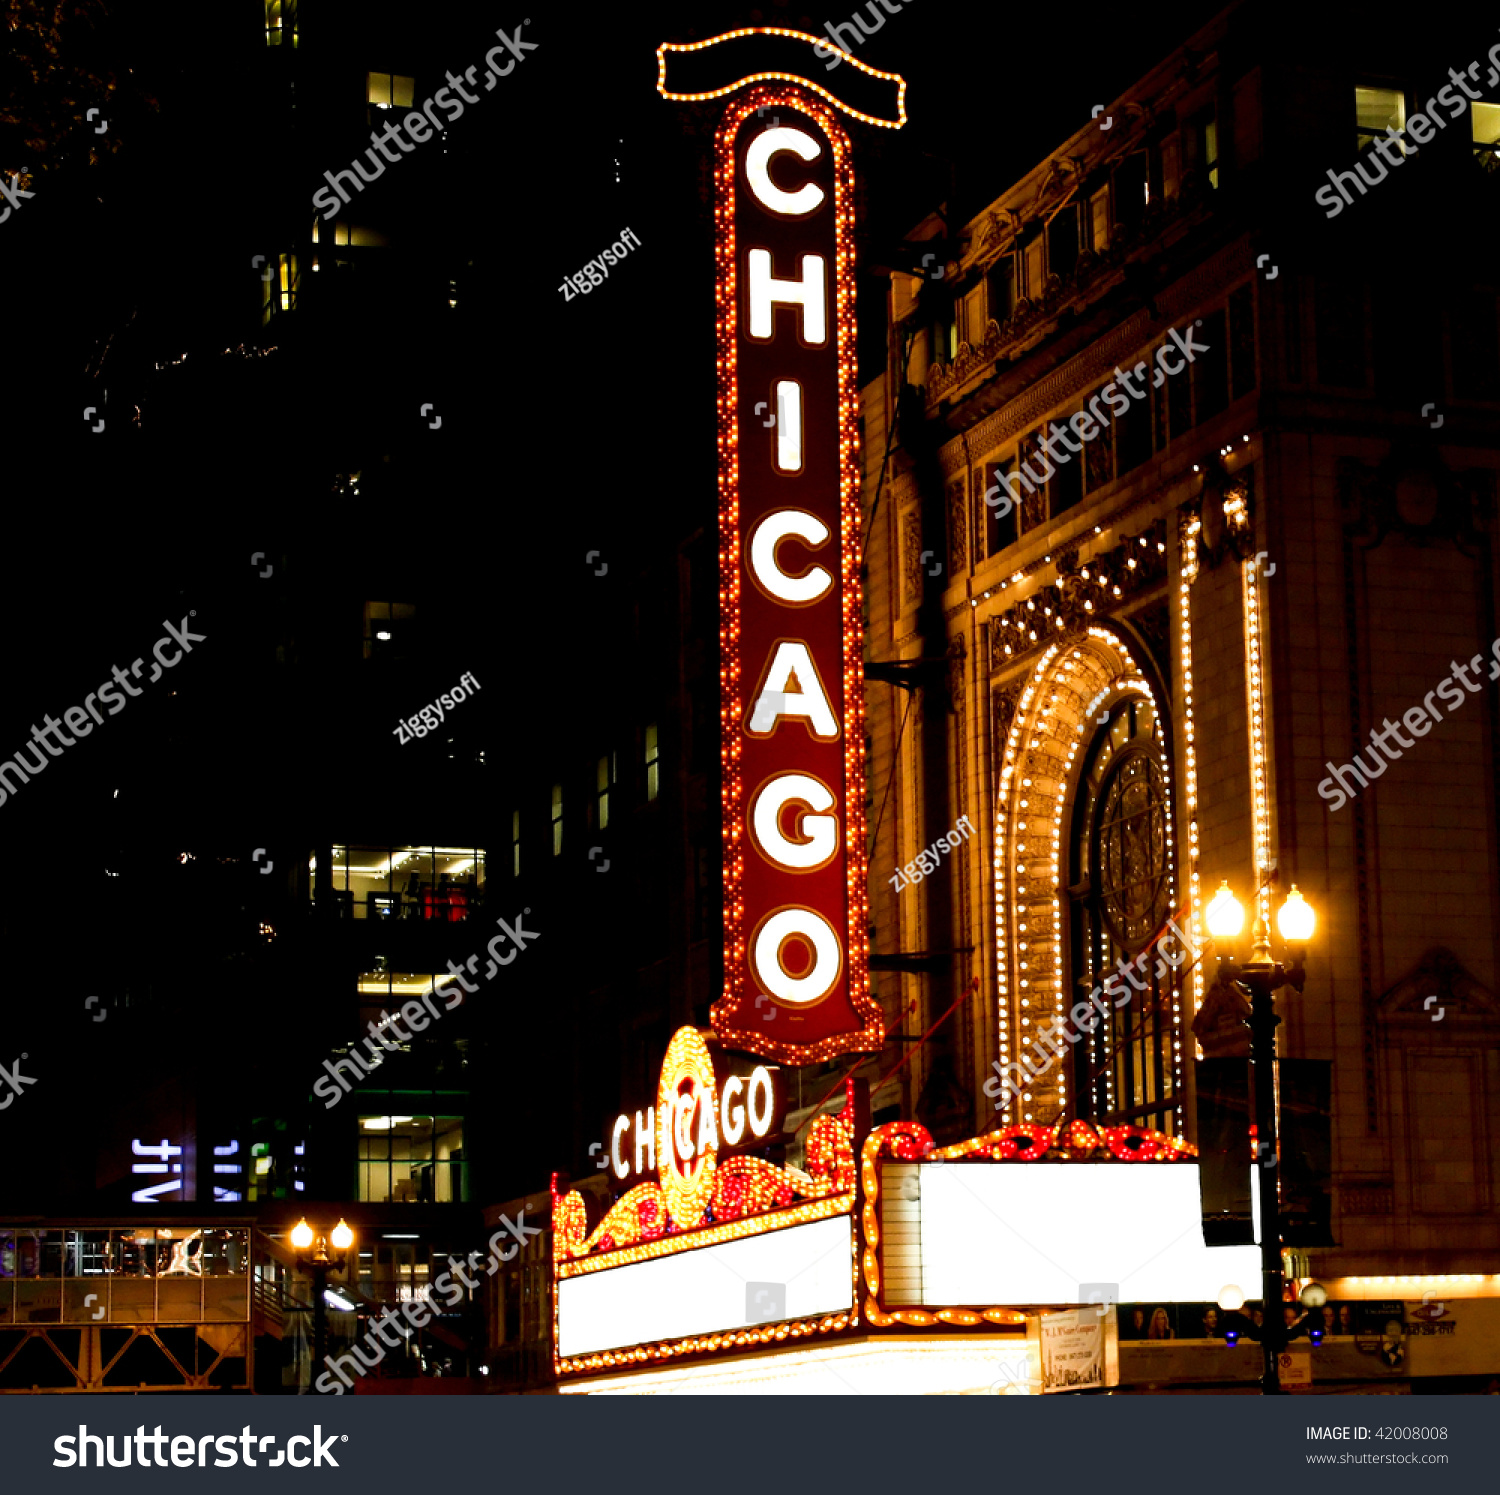 Famous Chicago Theater Sign Stock Photo 42008008 ...